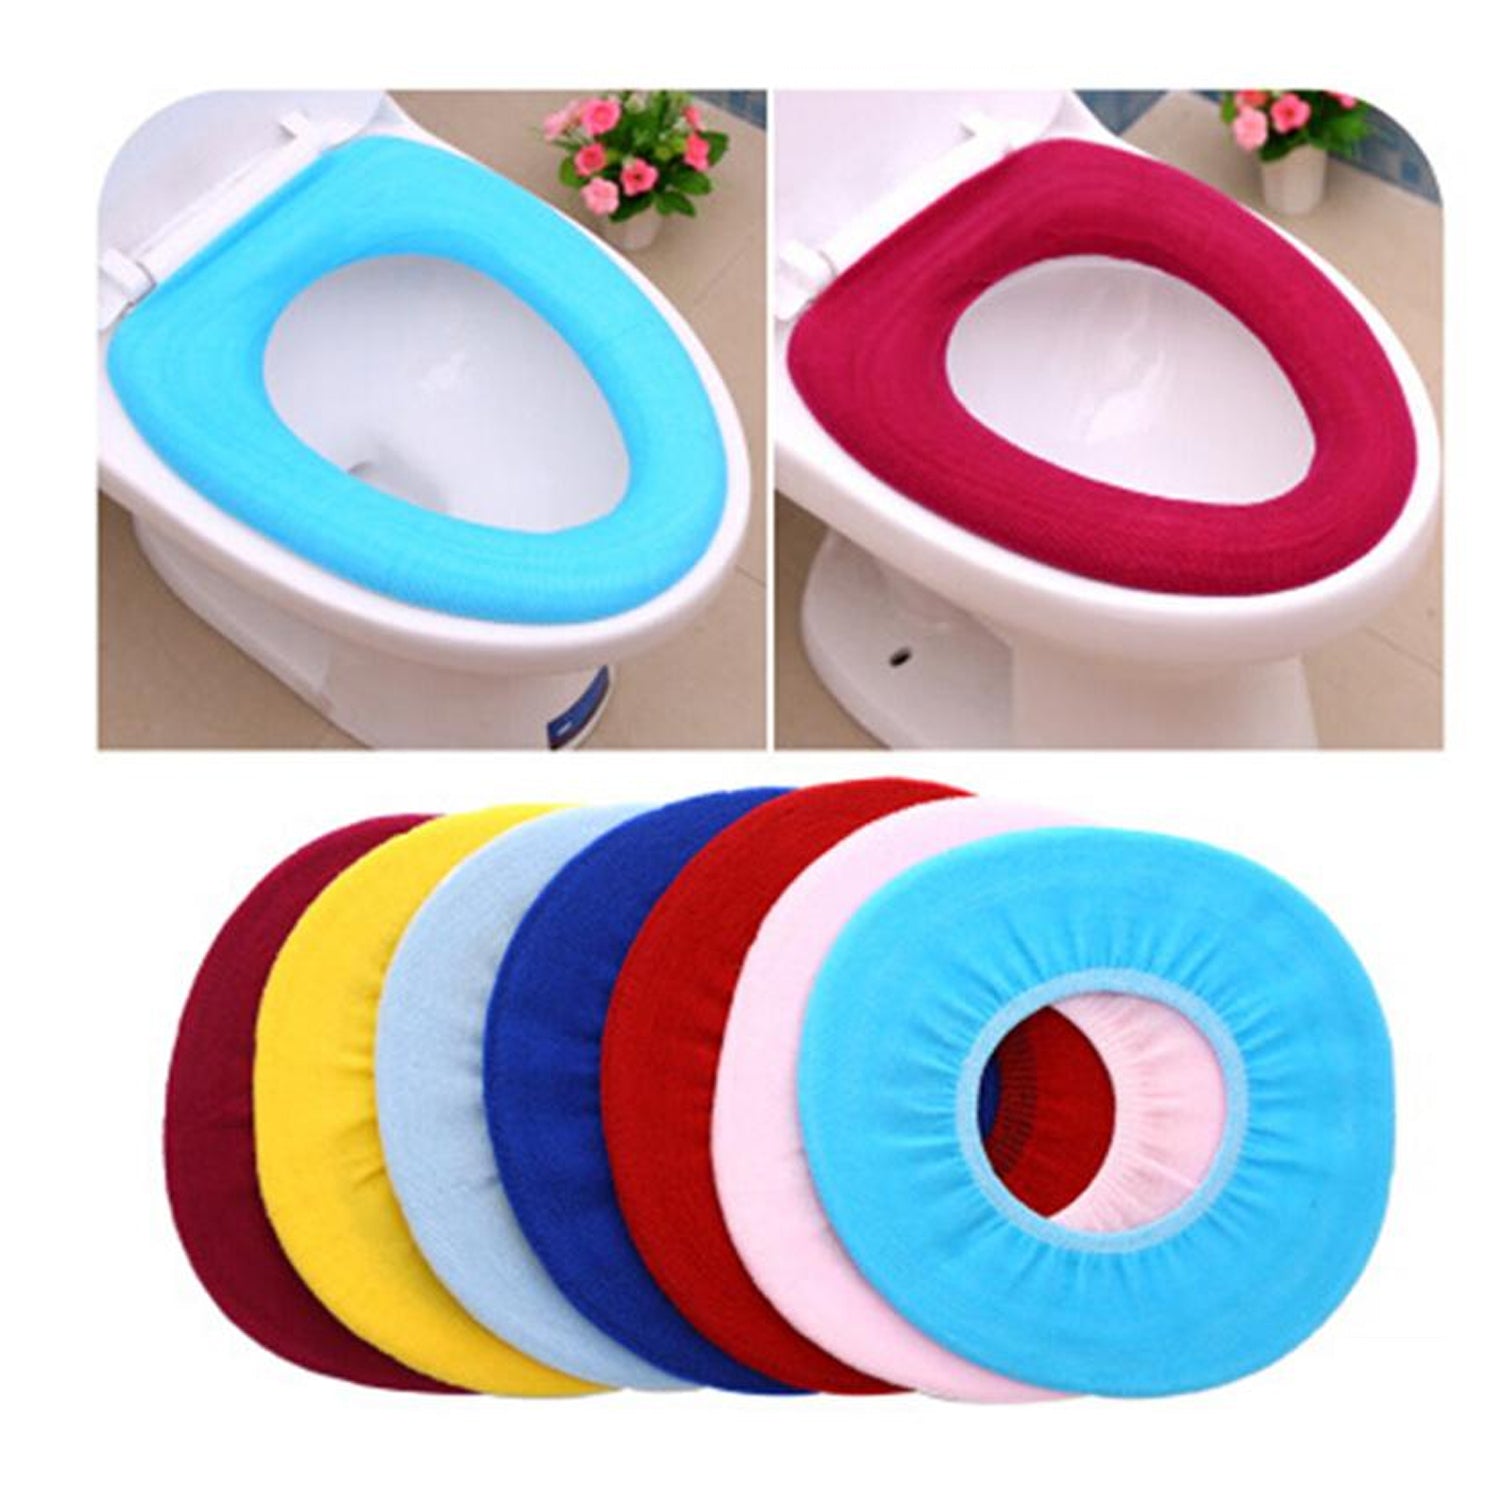 4768 Bathroom Soft Thicker Warmer Stretchable Washable Cloth Toilet Seat Cover Pads (1pc) JK Trends